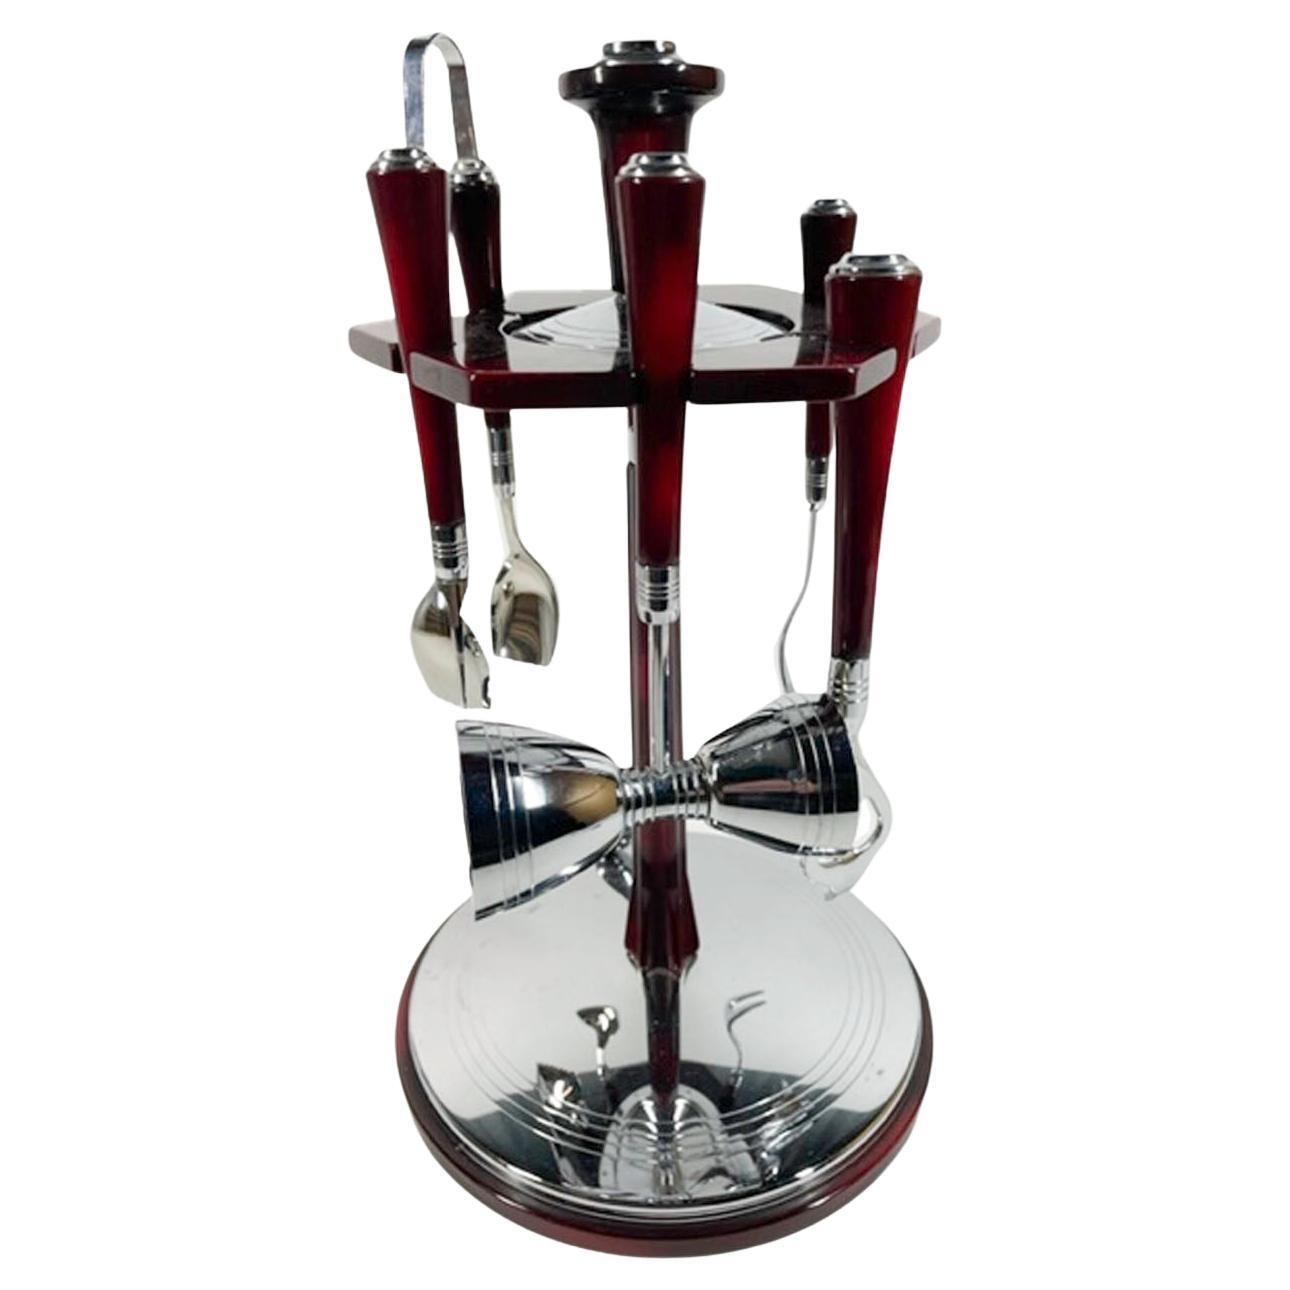 Glo-Hill 6 Piece Bar Tool Set with Revolving Stand in Red Bakelite and Chrome